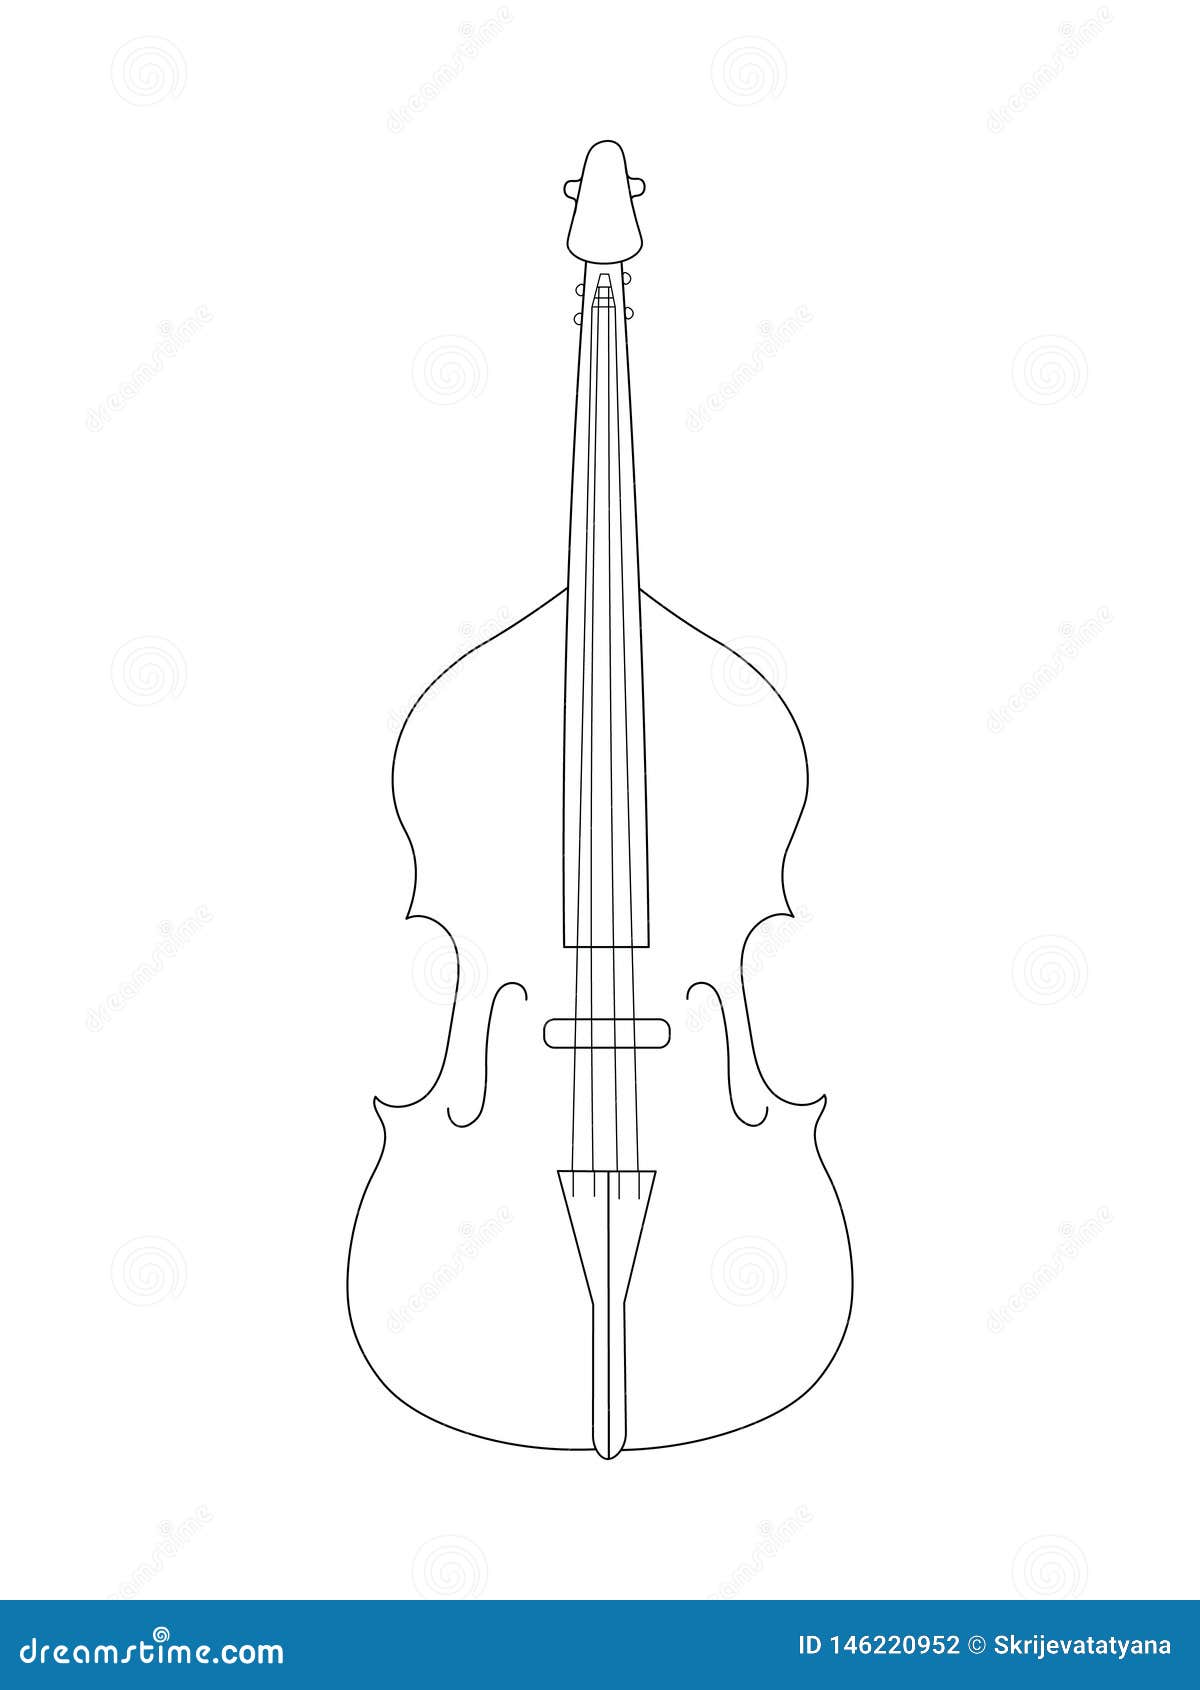 Double bass drawing. | CanStock